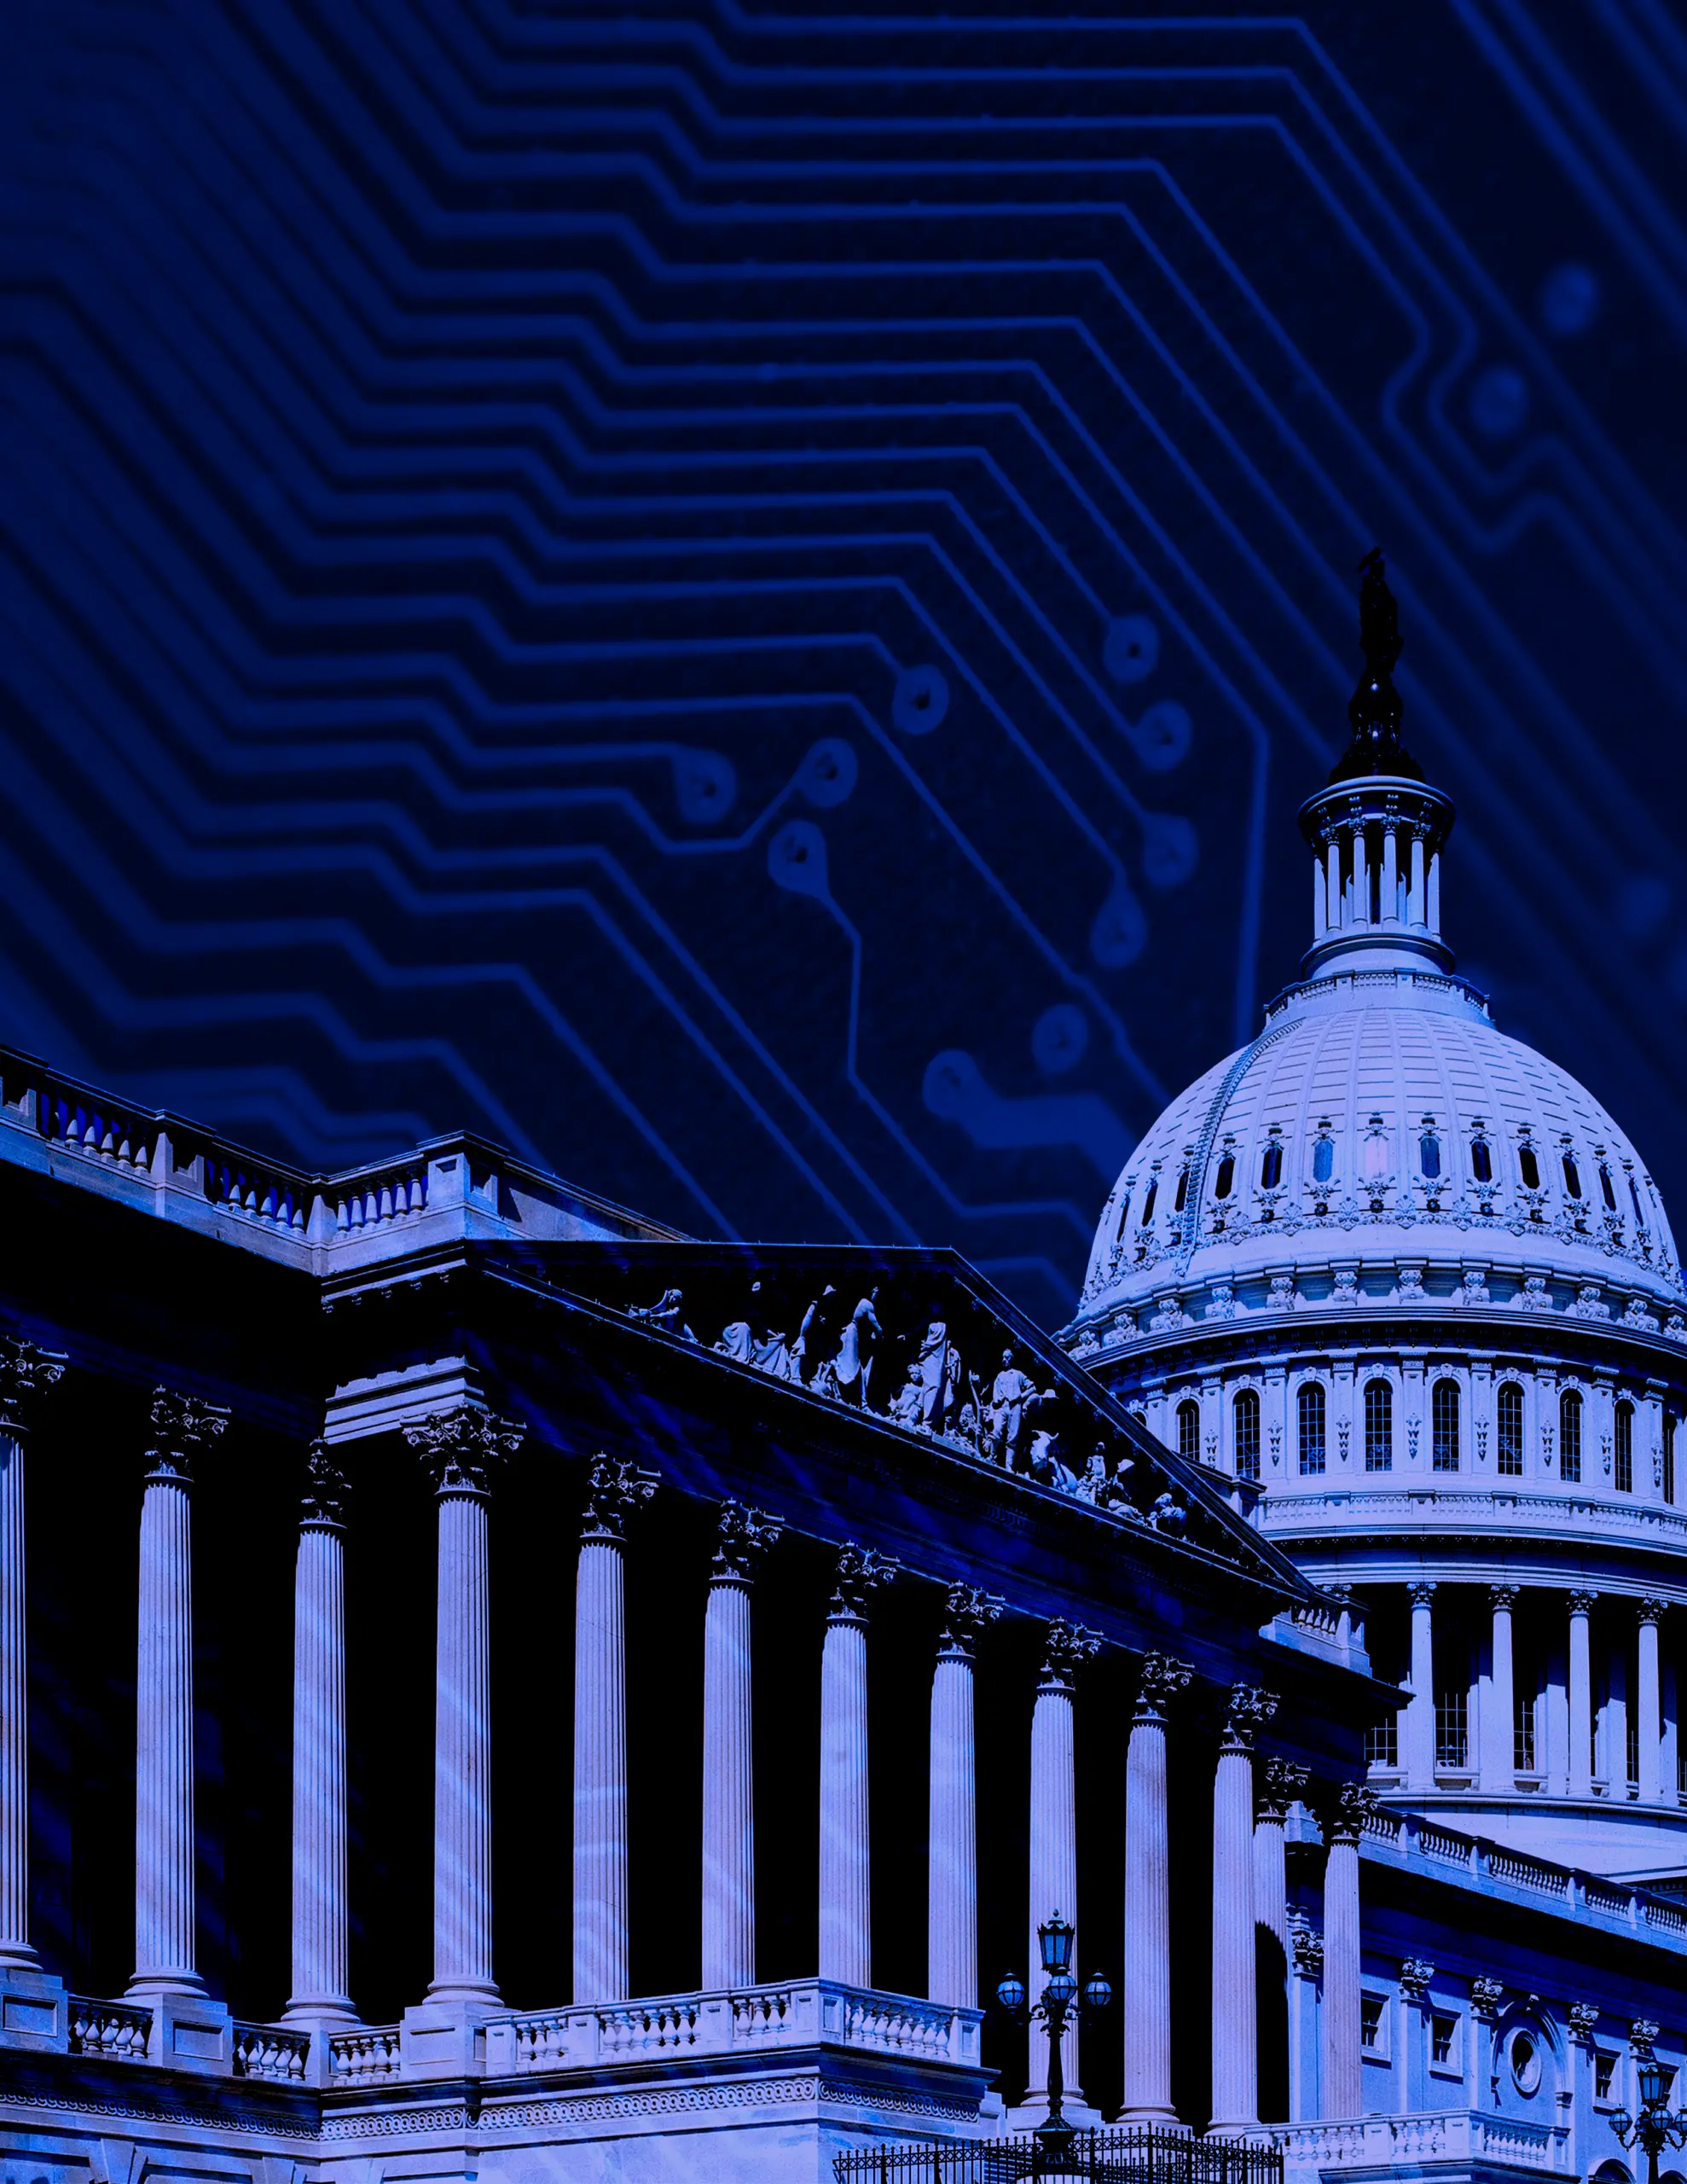 Image of the U.S. Capitol building with a blue tint and a circuit background.